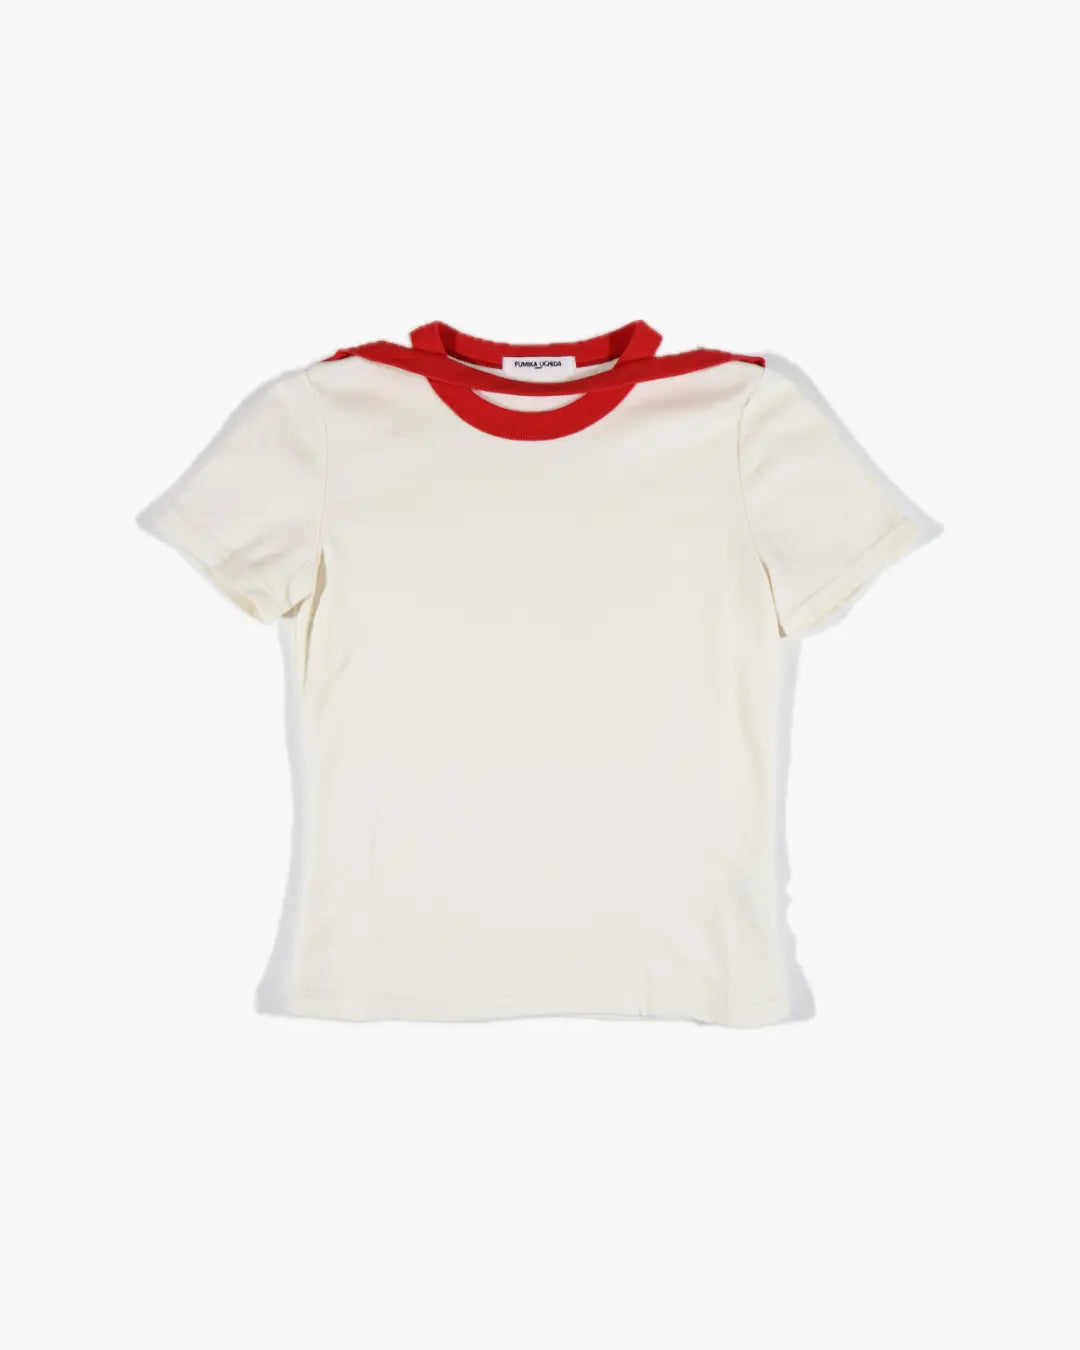 FUMIKA_UCHIDA / TRIMMED DOUBLE NECK TEE / OFFWHITE/RED